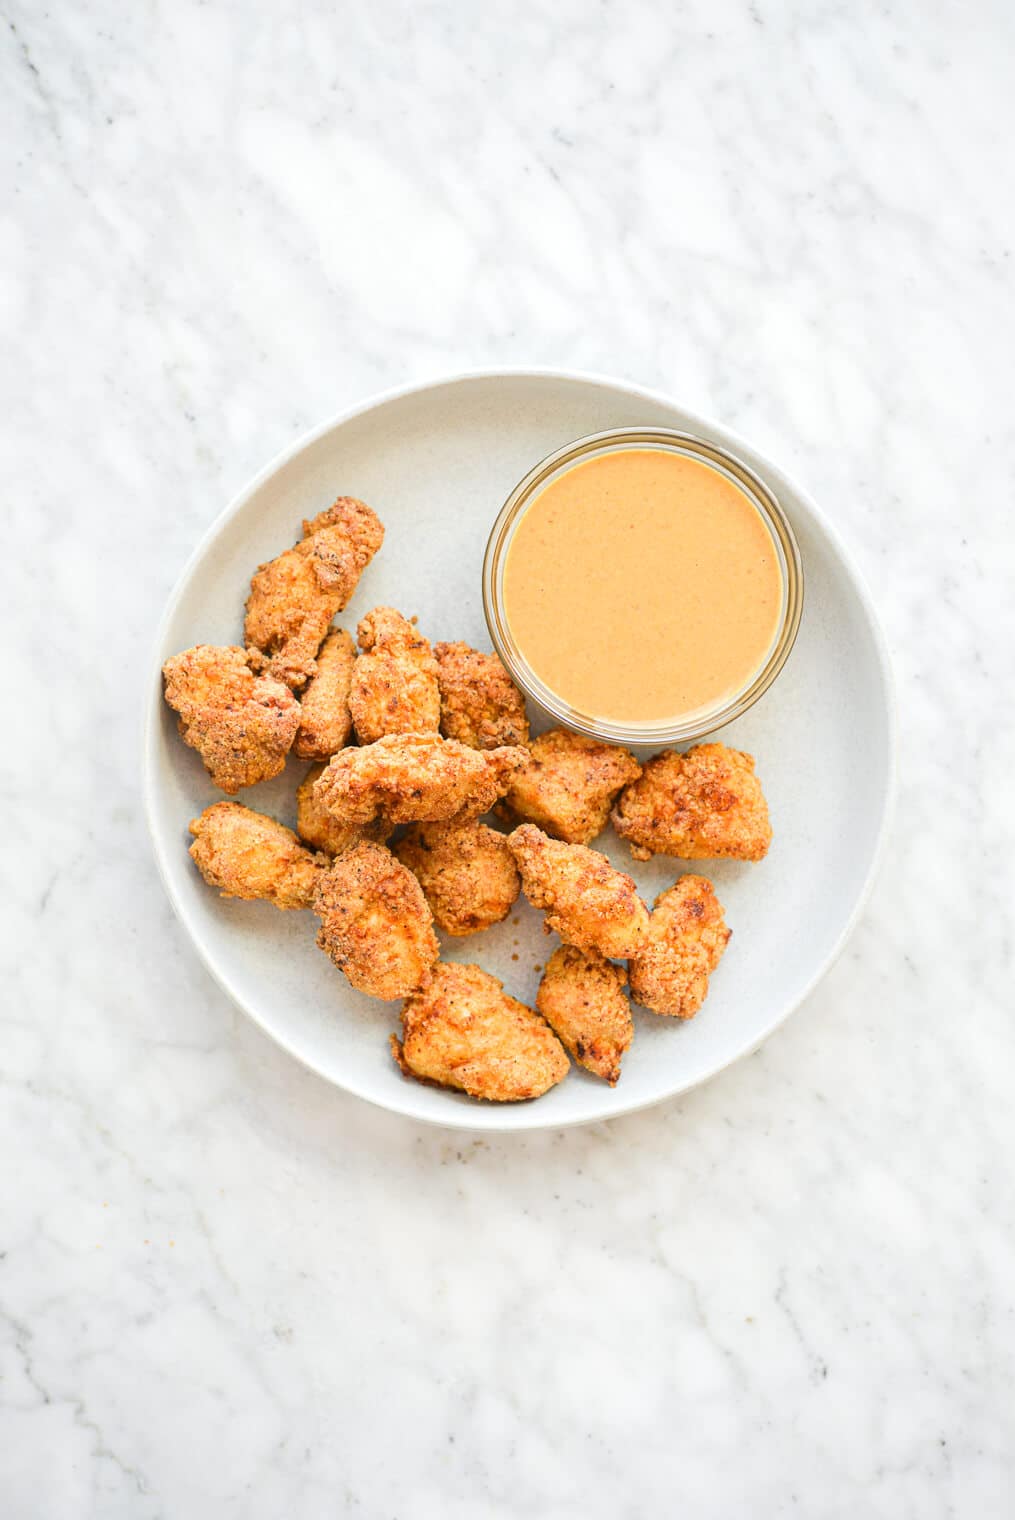 a plate of air fryer chicken nuggets next to a small glass bowl of an orange sauce